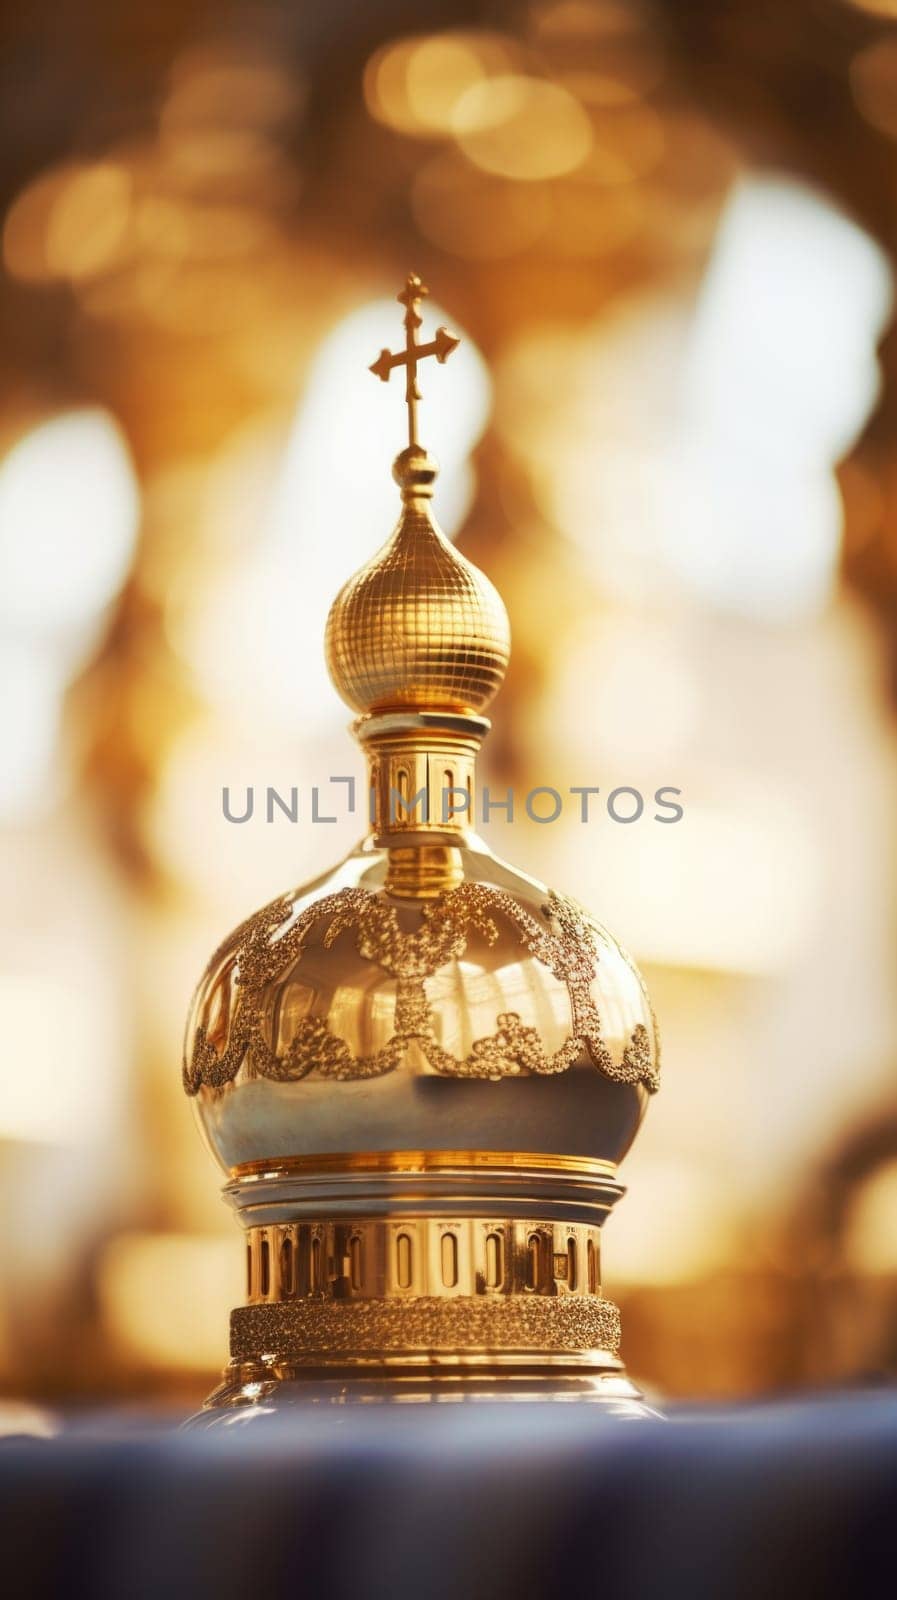 A golden dome on top of a table